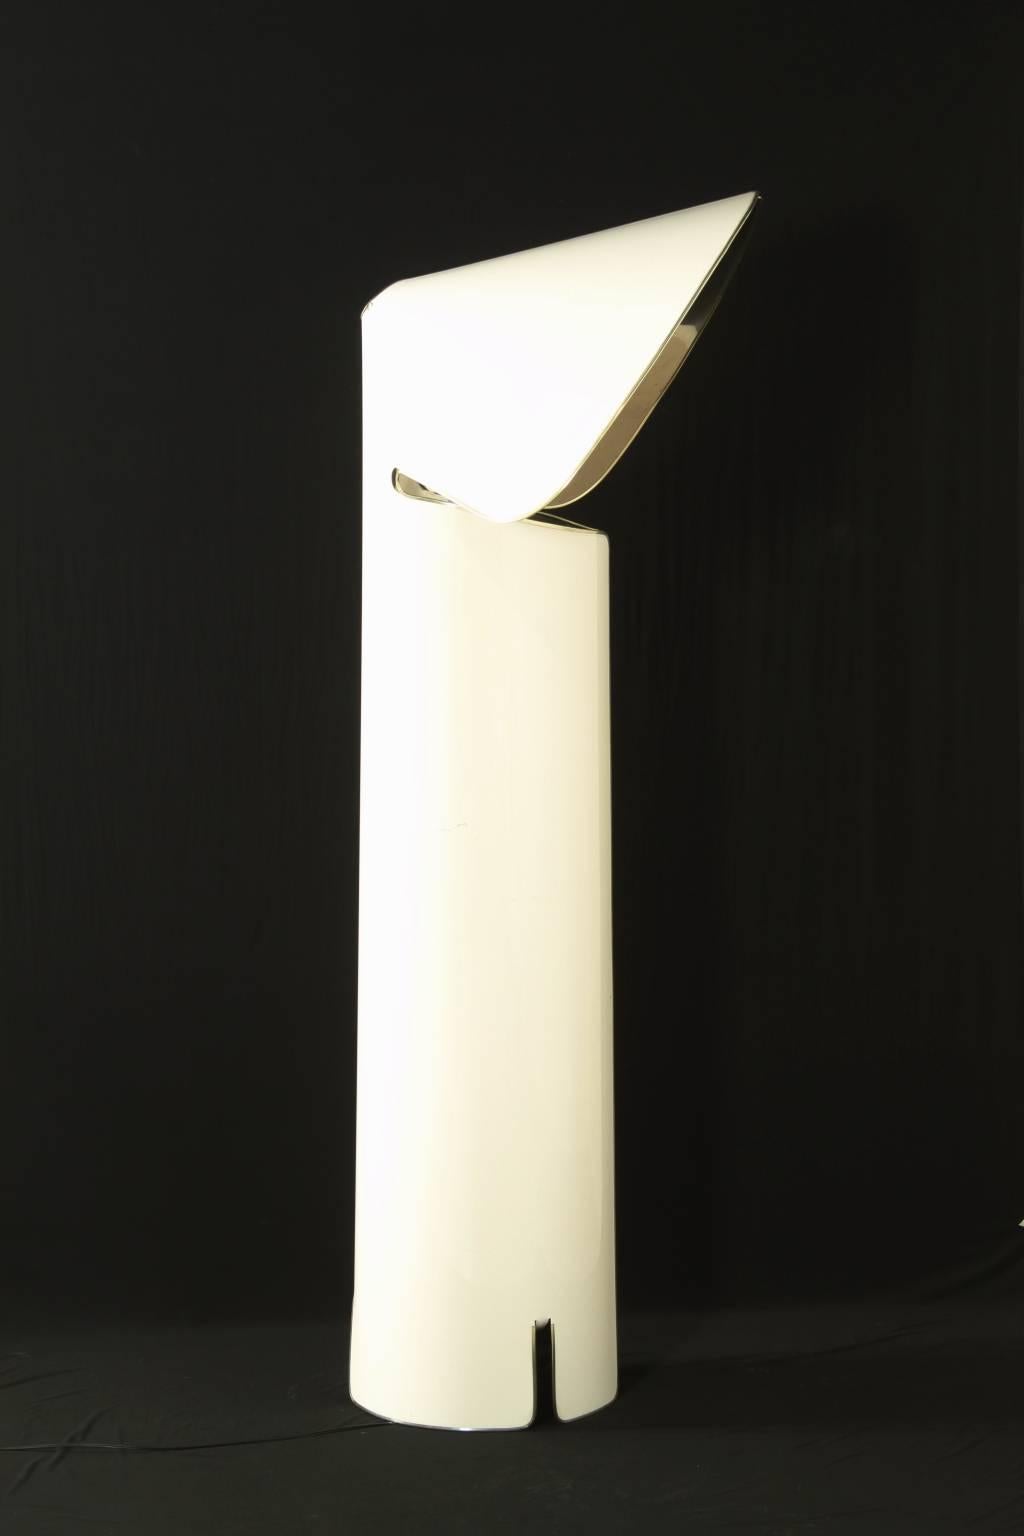 Floor lamp 'Chiara' by Mario Bellini, manufactured in Italy by Flos in the 1960s. Enamelled steel sheet, chromed interior. 